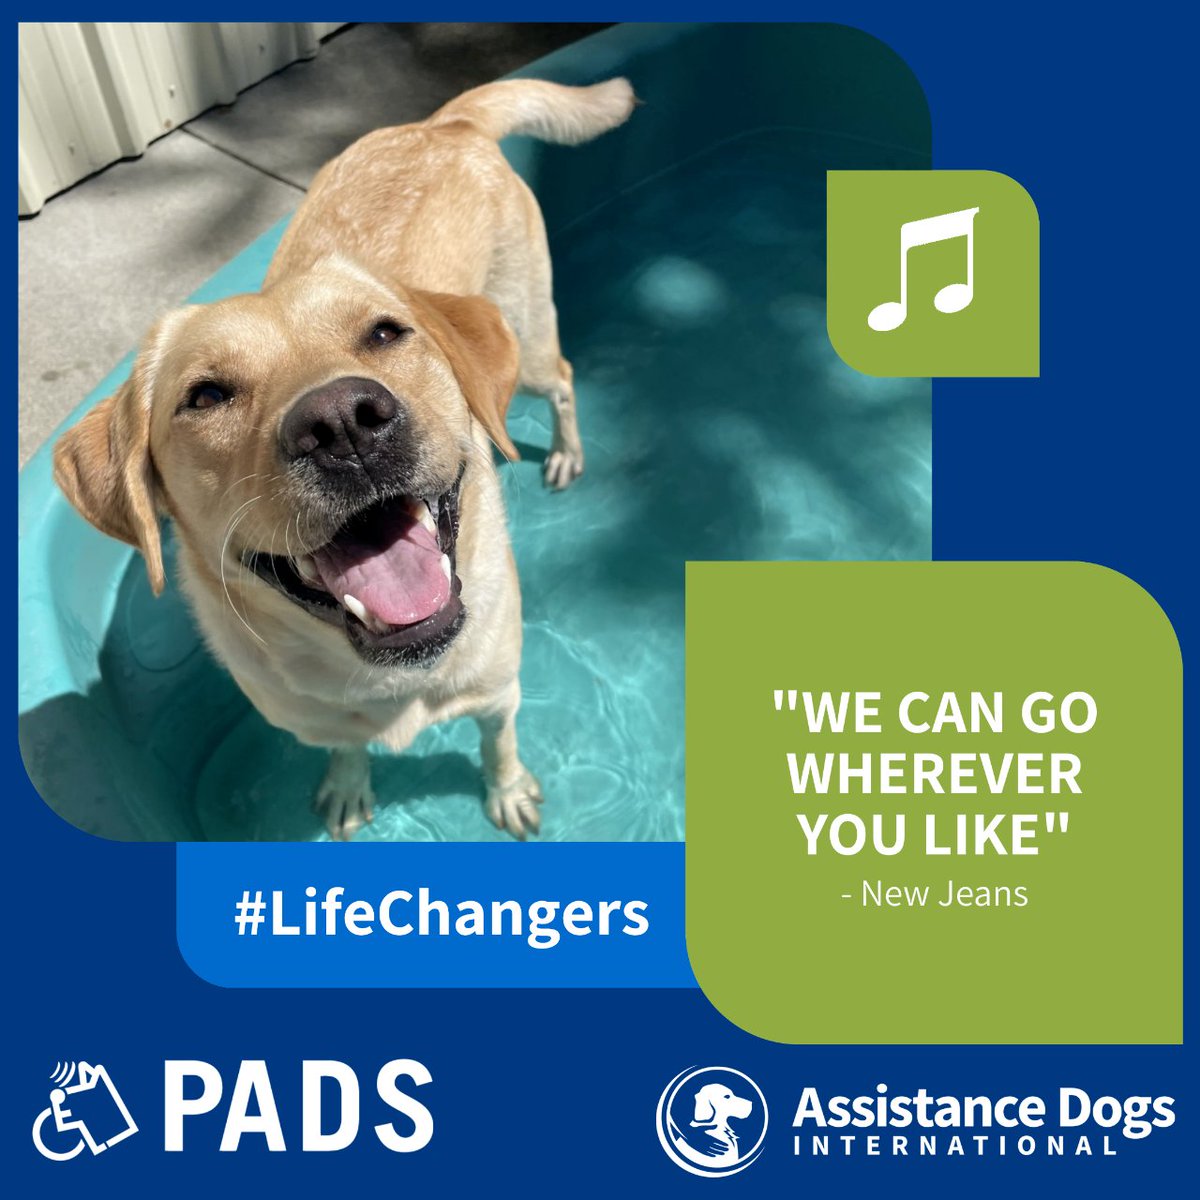 Kim Allen, a volunteer with PADS, writes 'The people I’ve met are some of the kindest of all.'  Assistance Dogs-in-Training have public access rights, they can go to many different places, like stores and even on transit! As @NEWJEANSGLOBAL  sings 'we can go wherever you like!'